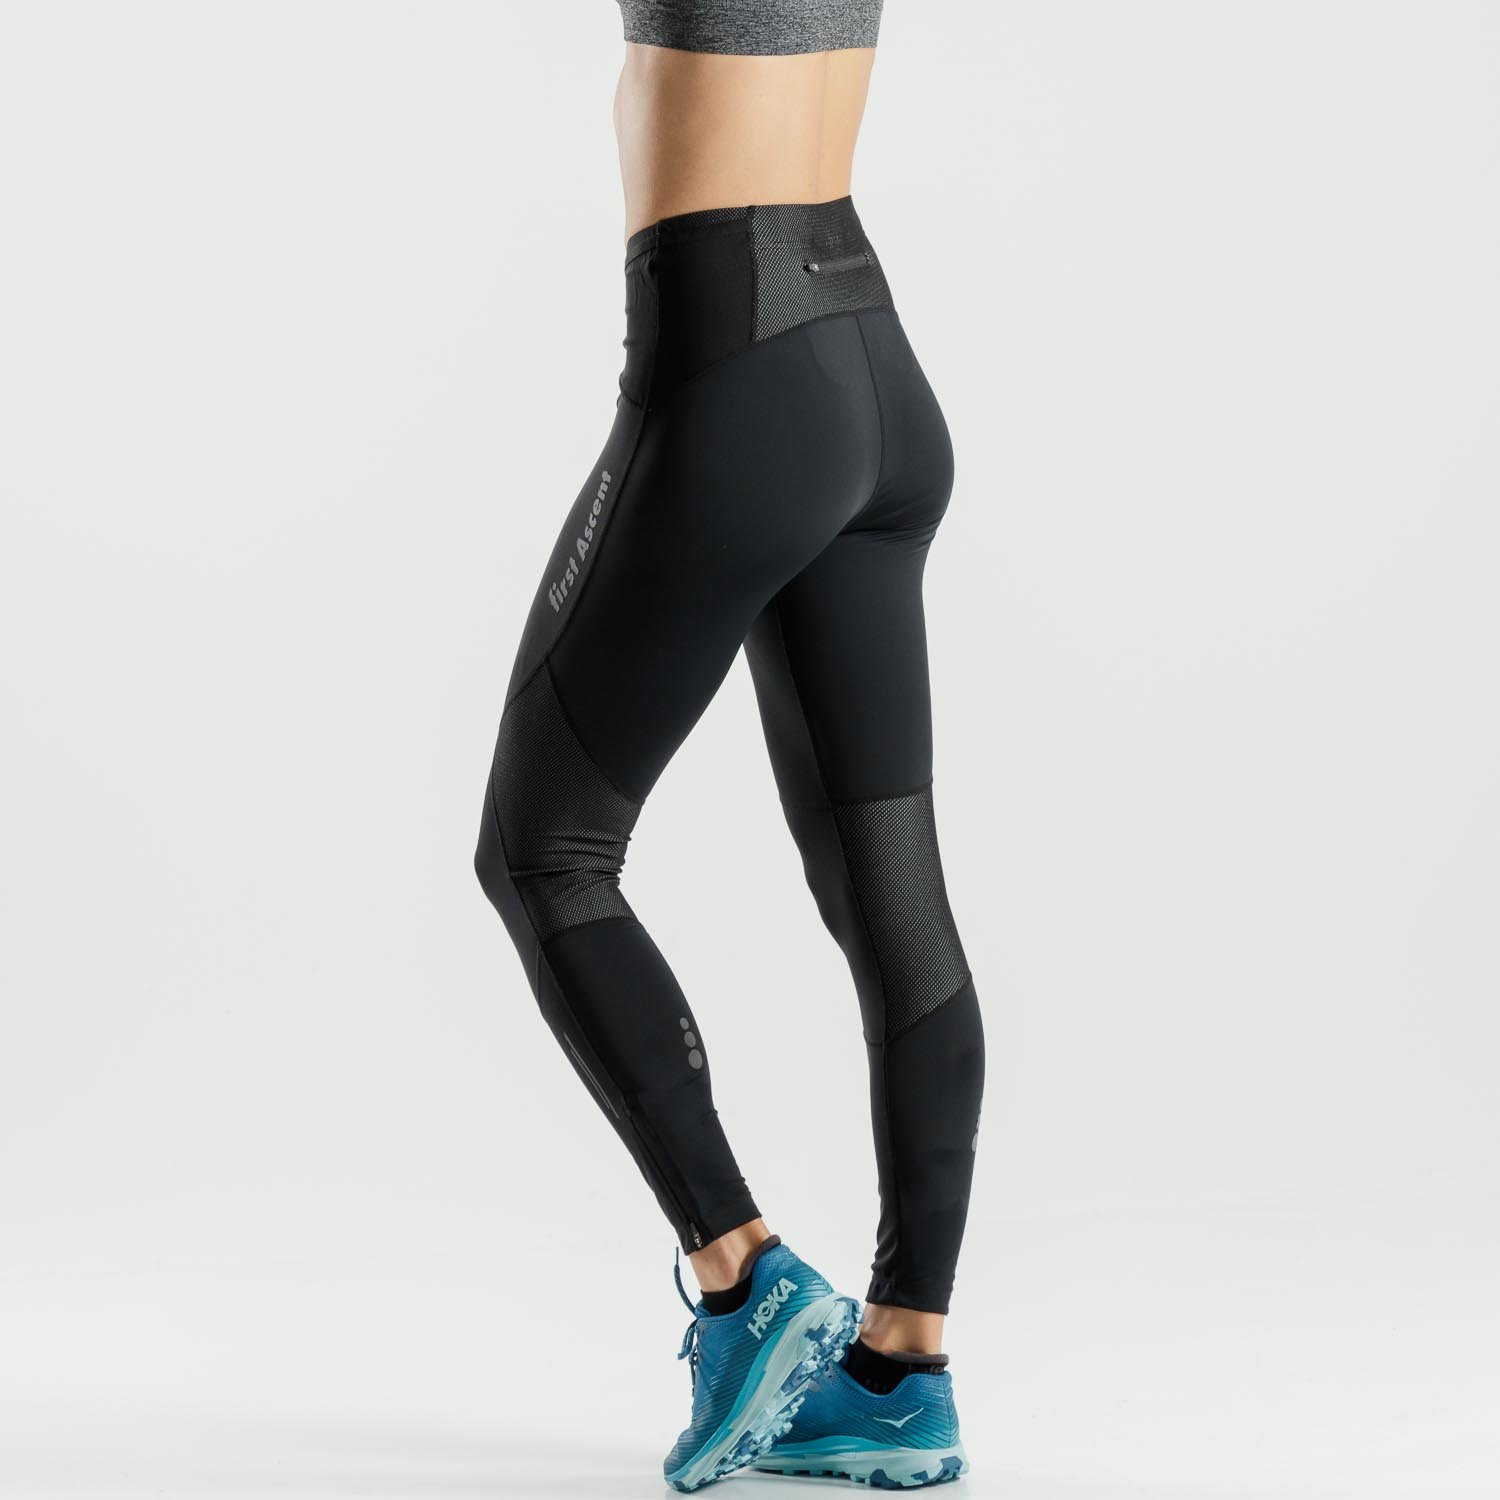 Women's FLX Ascent High-Waisted 7/8 Ankle Leggings